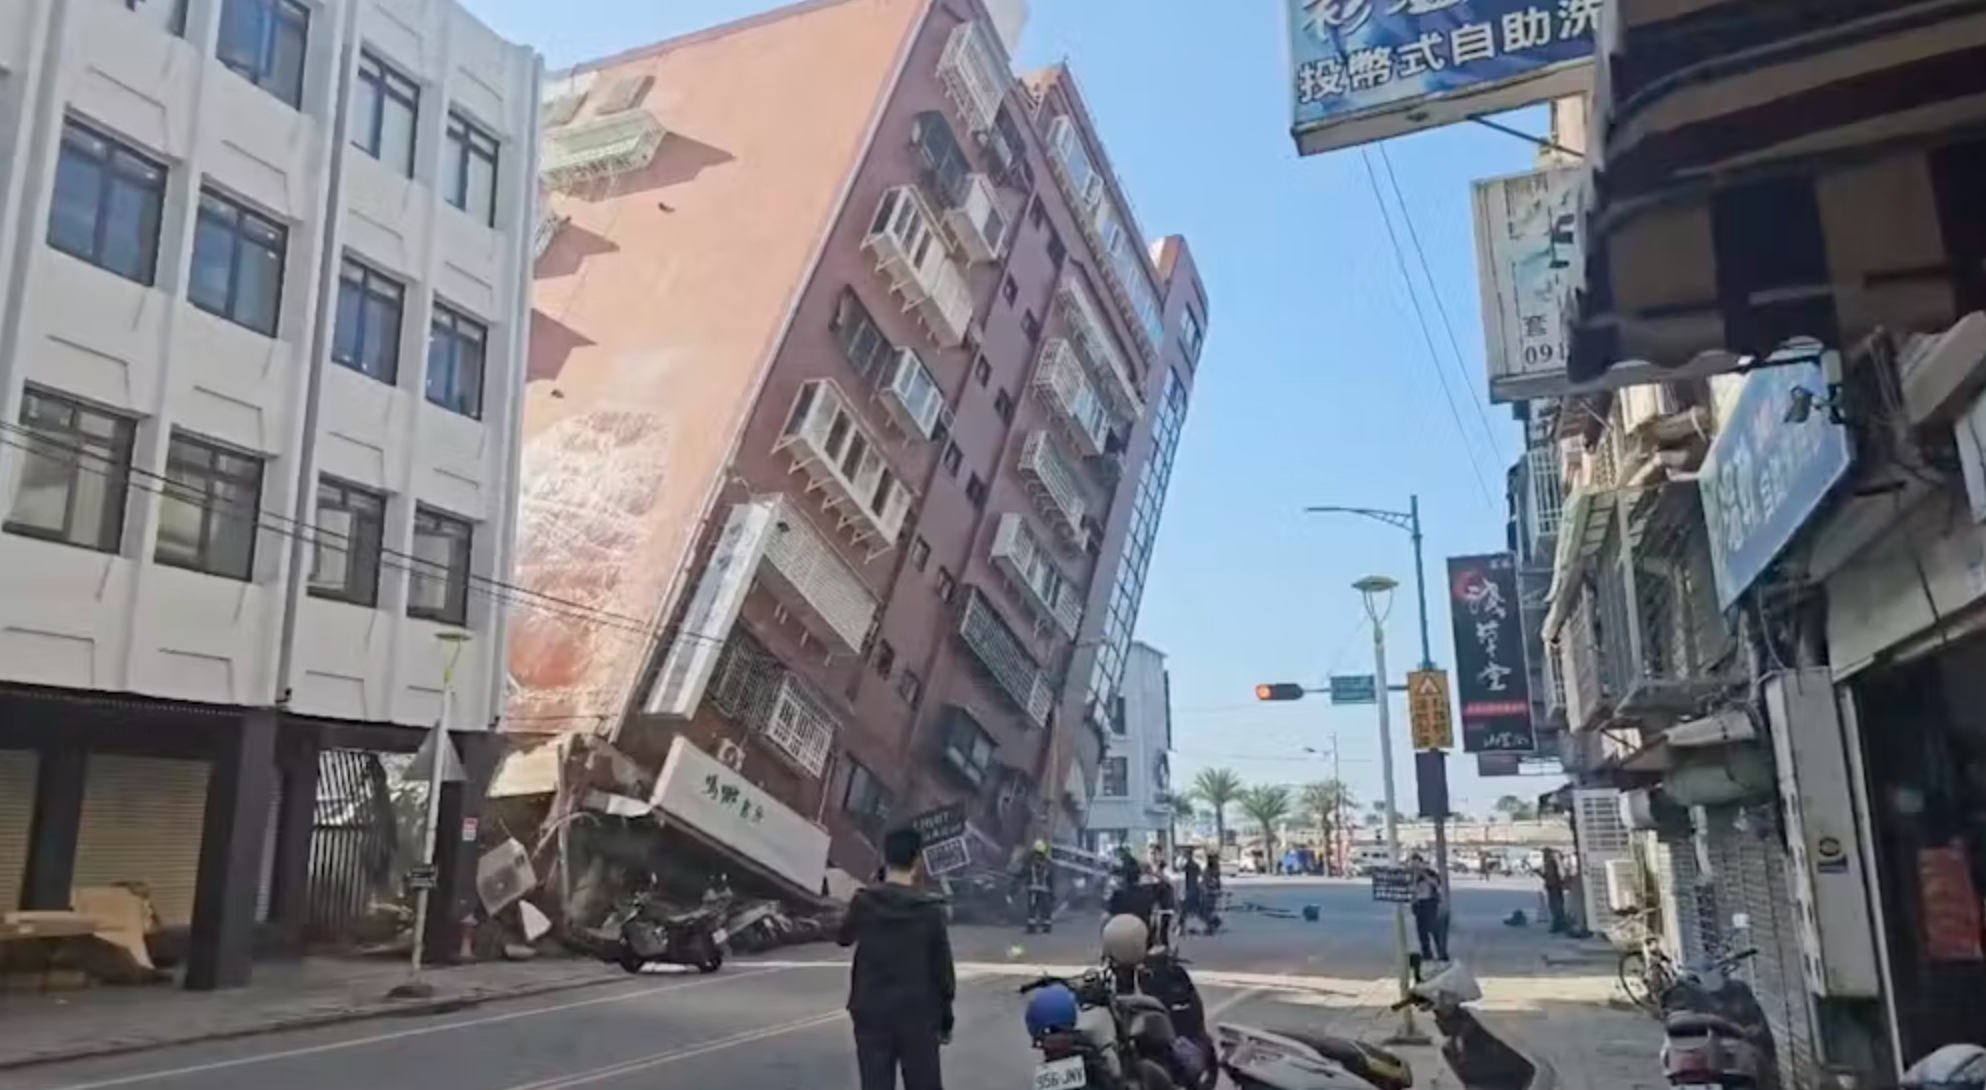 Video footage run by TVBS shows a partially collapsed building after an earthquake struck in Hualien, eastern Taiwan. TVBS via AP/AAP